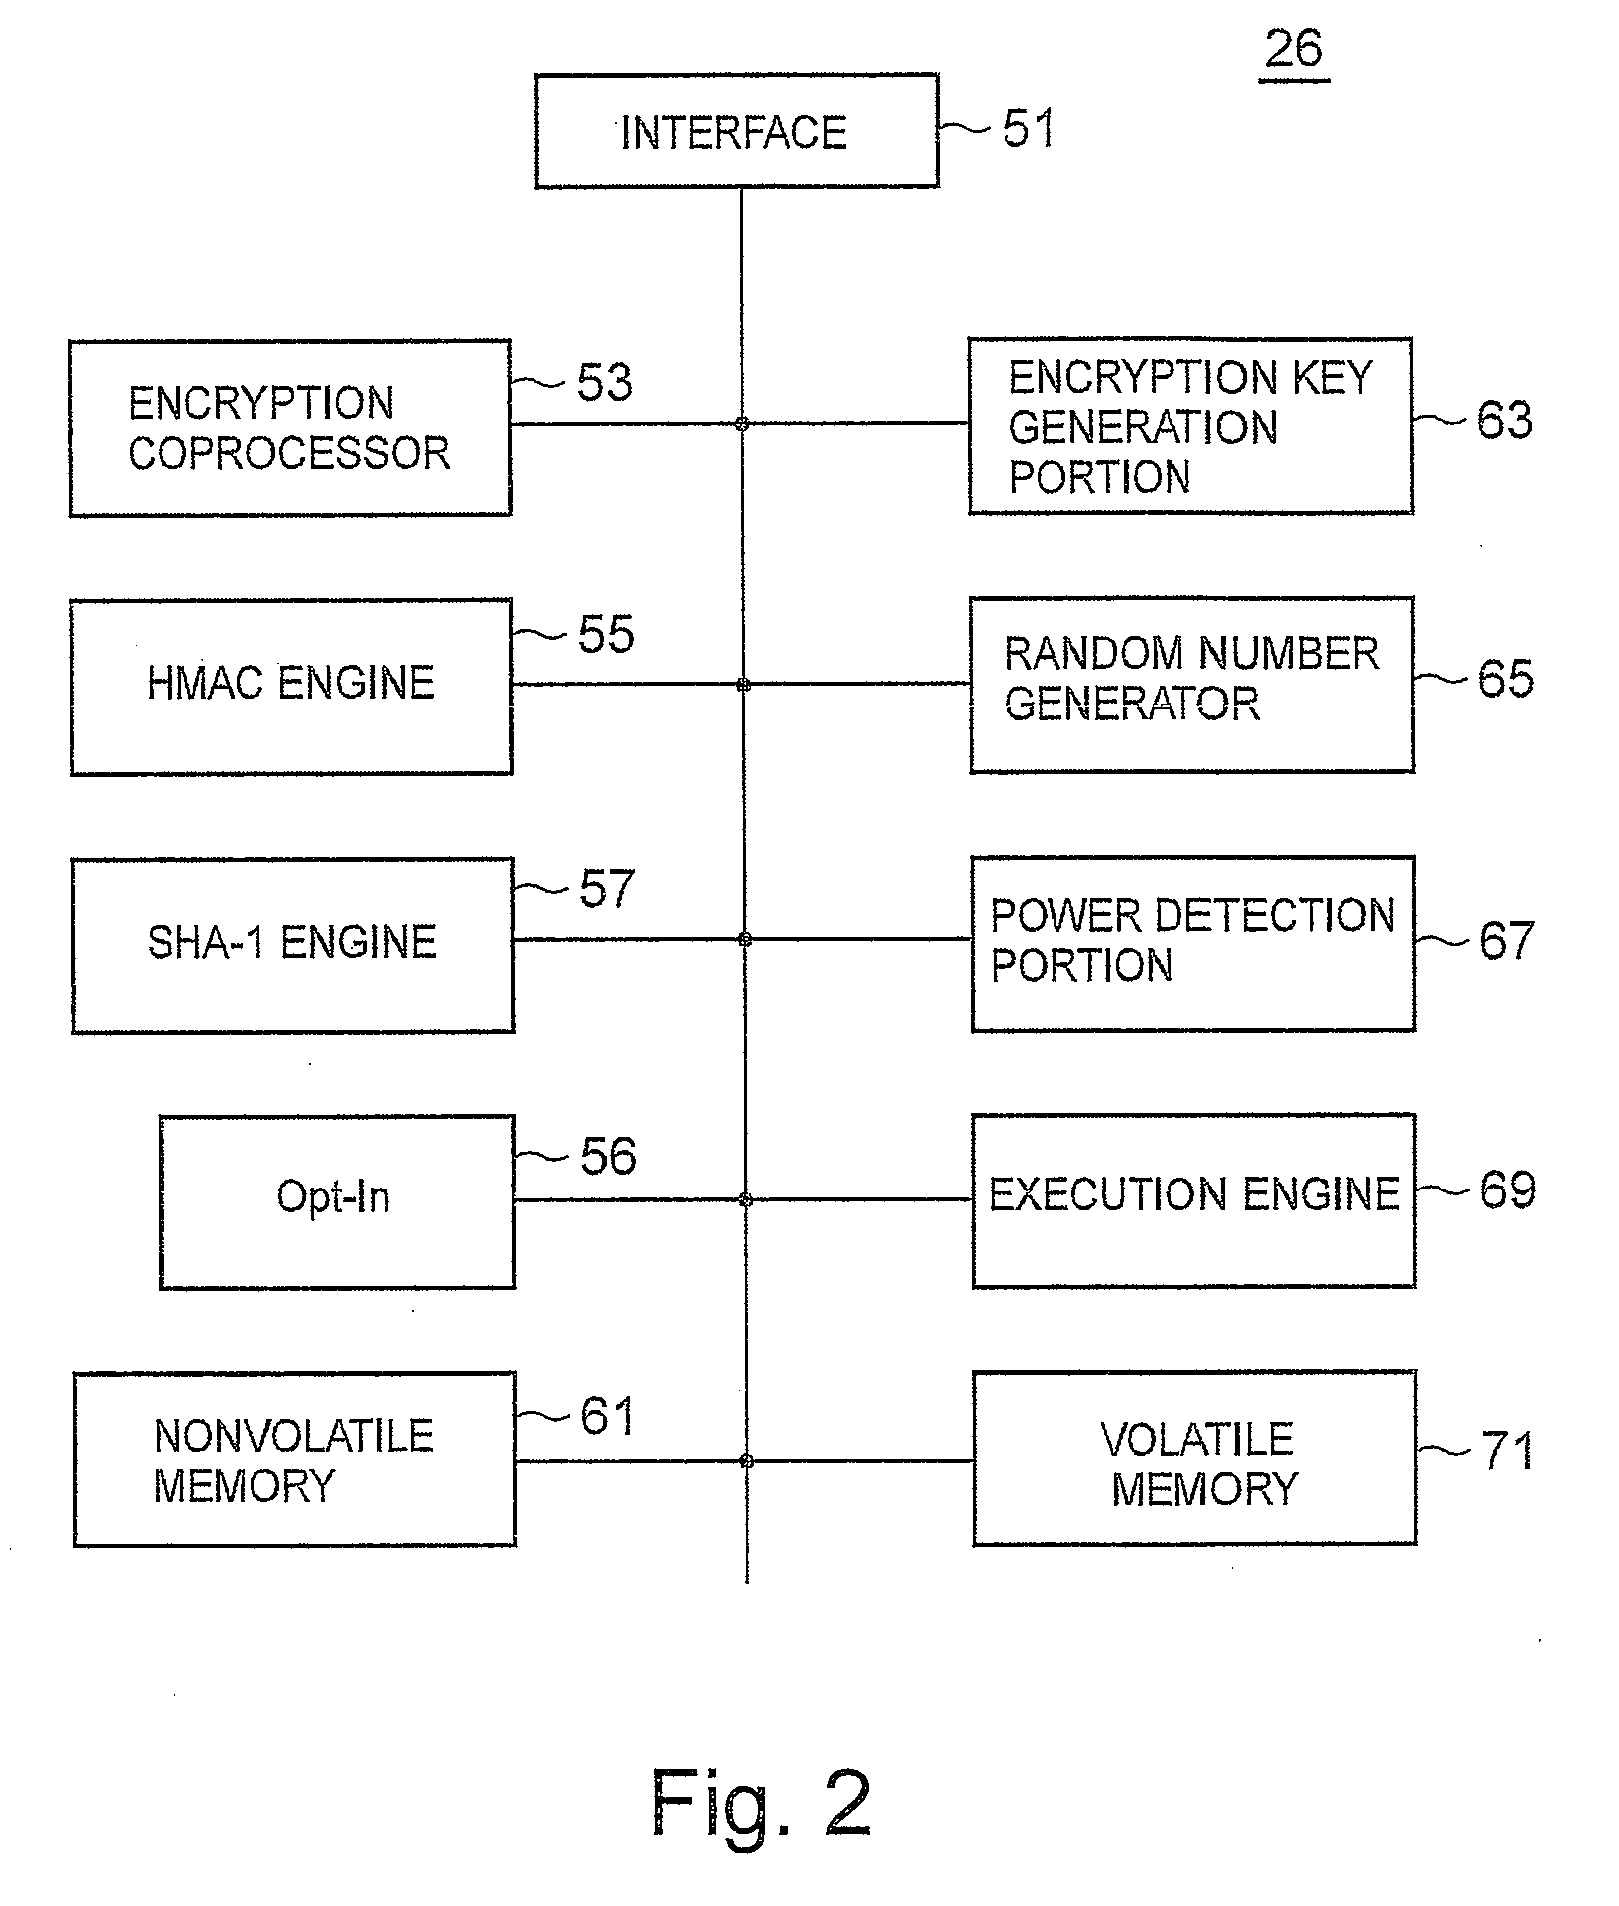 Computers Having a Biometric Authentication Device